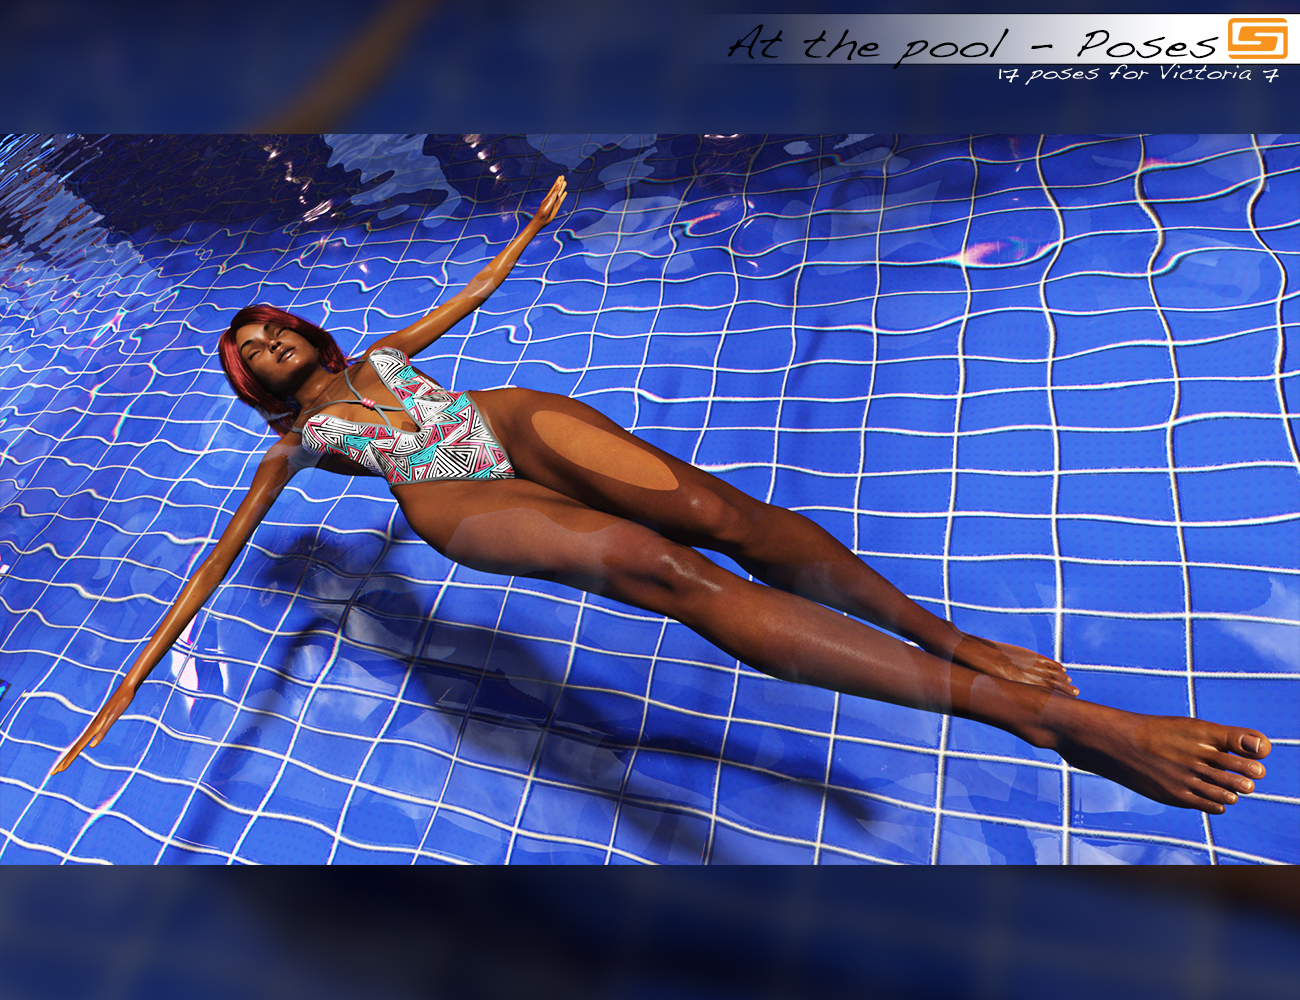 At the Pool - Poses for Victoria 7